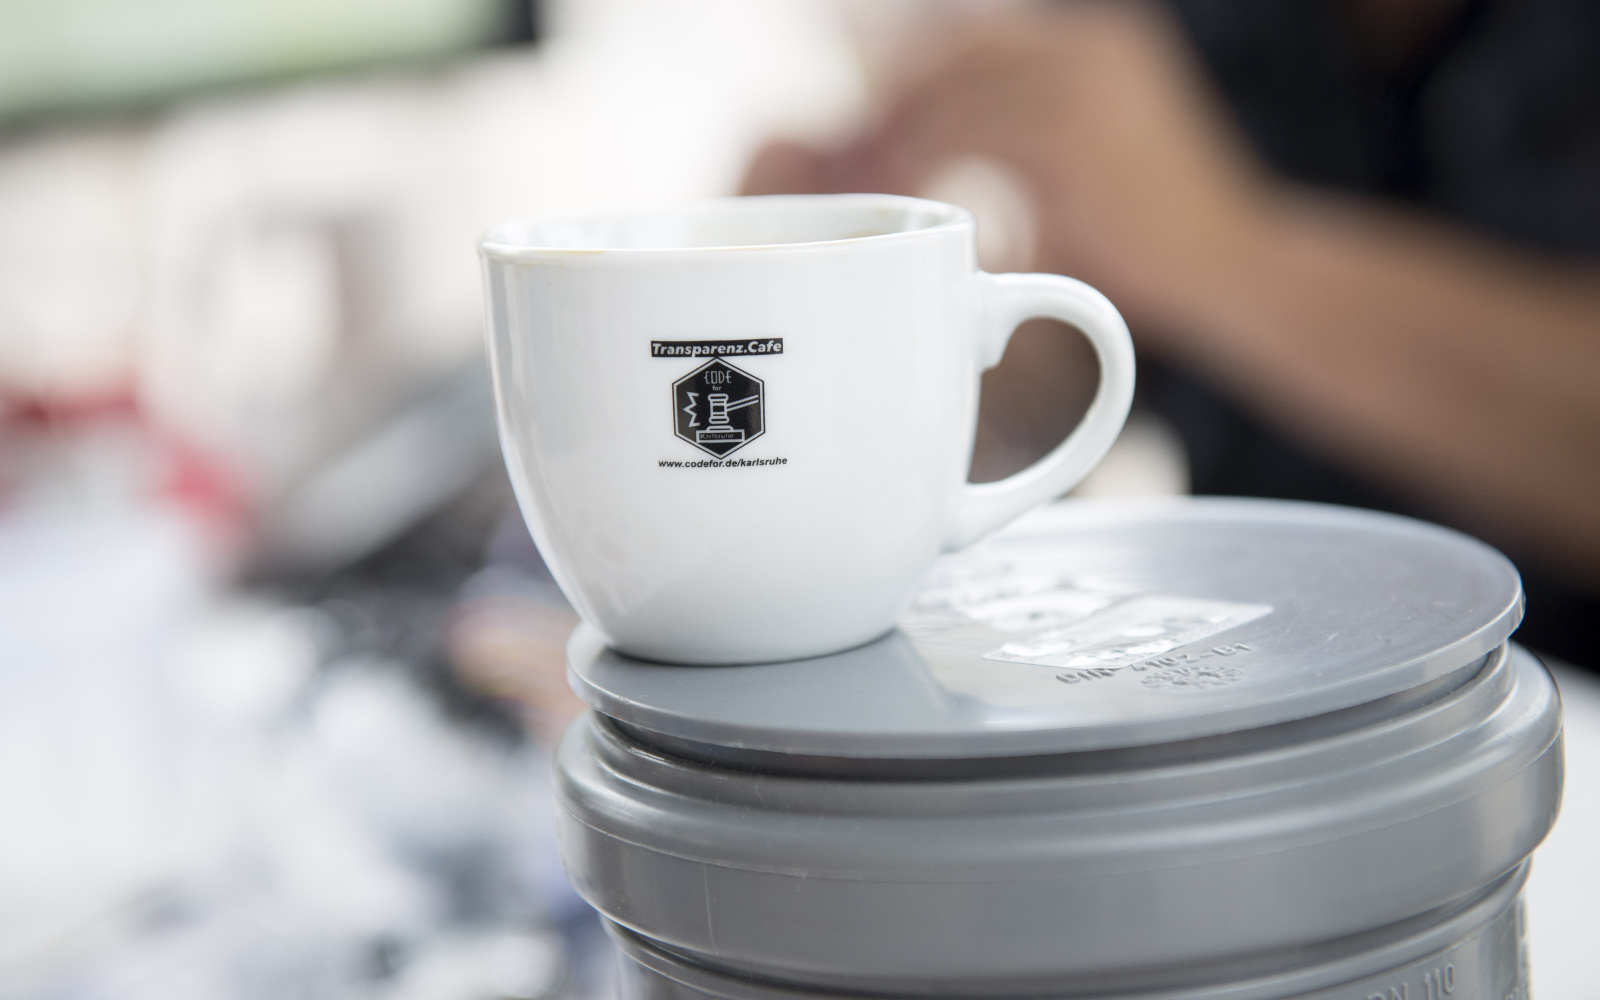 You can see a white coffee cup with the Transparenz Cafè logo on it.